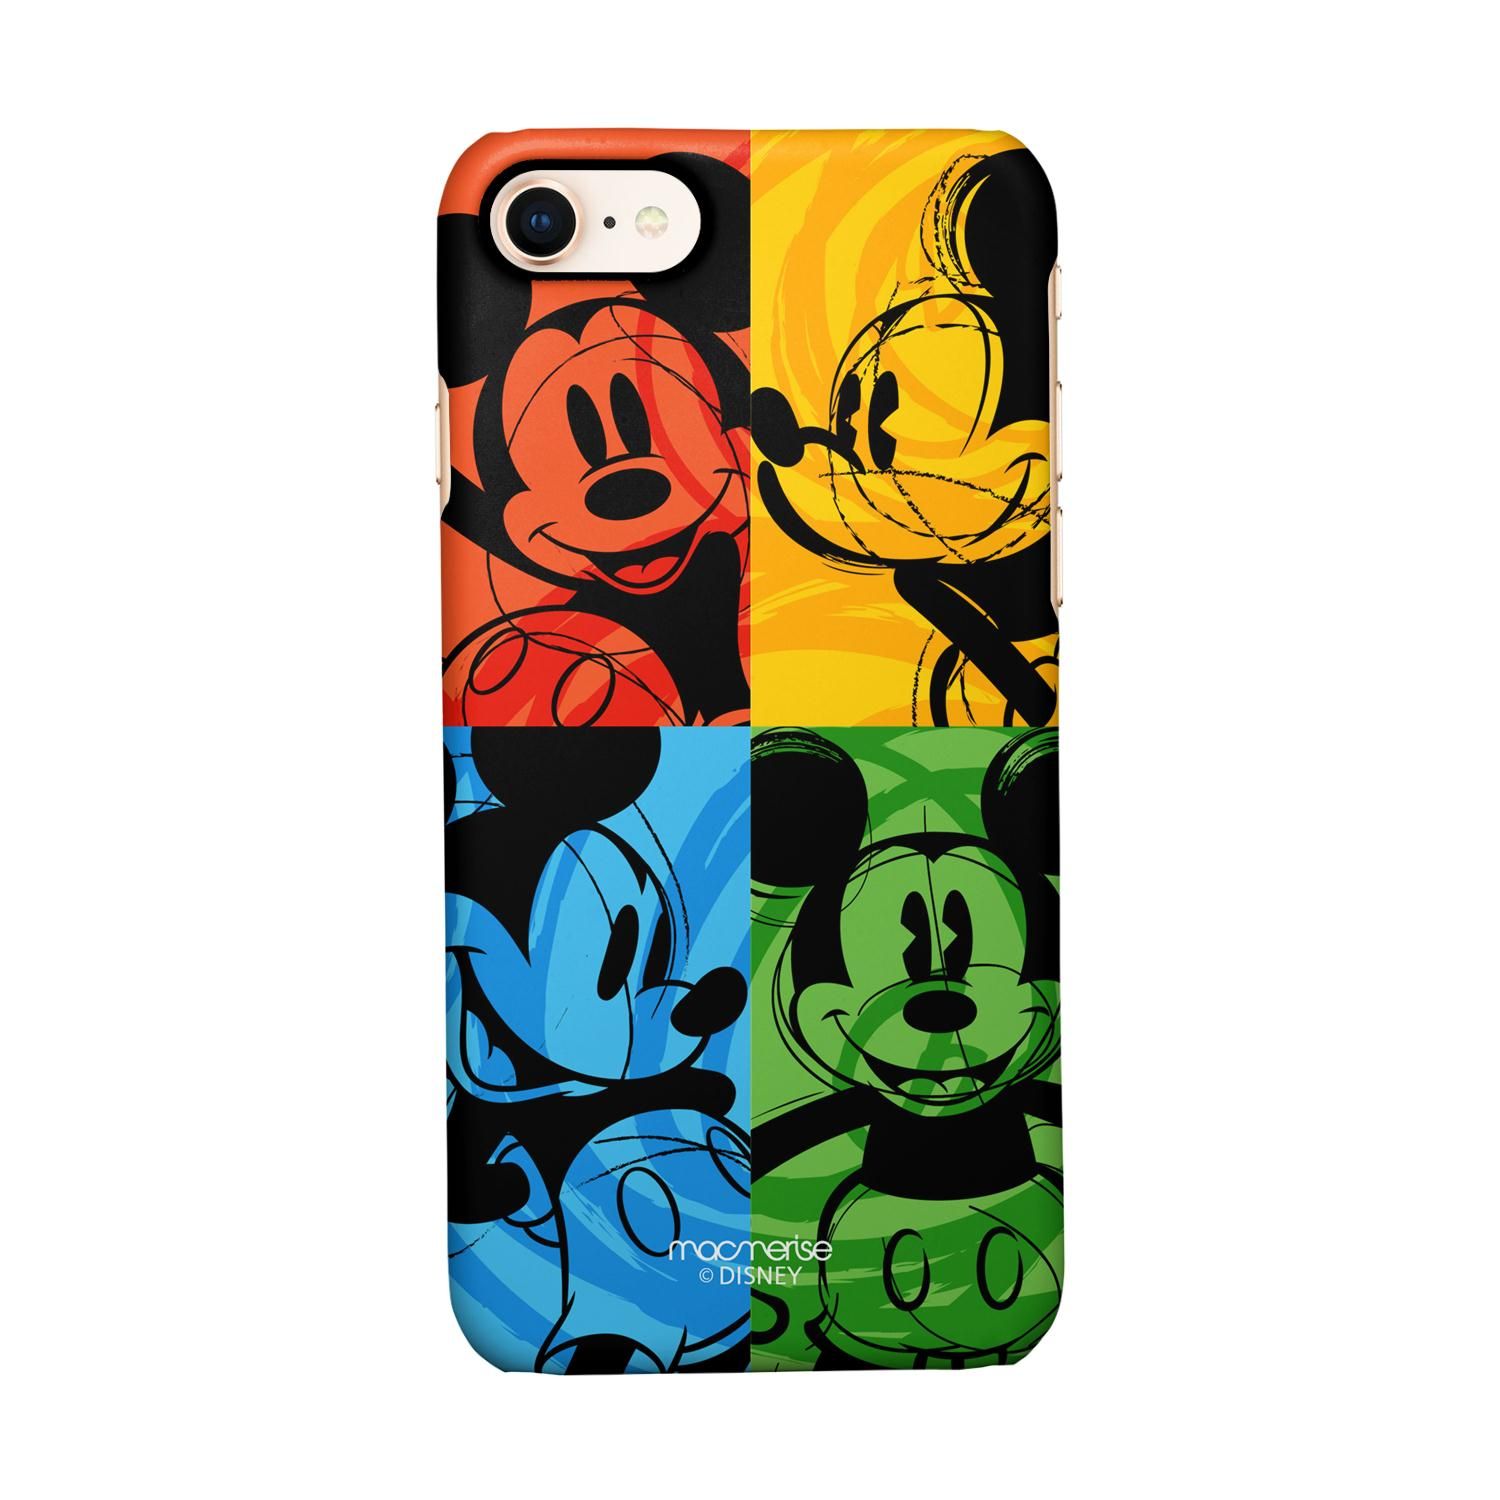 Buy Shades of Mickey - Sleek Phone Case for iPhone 7 Online